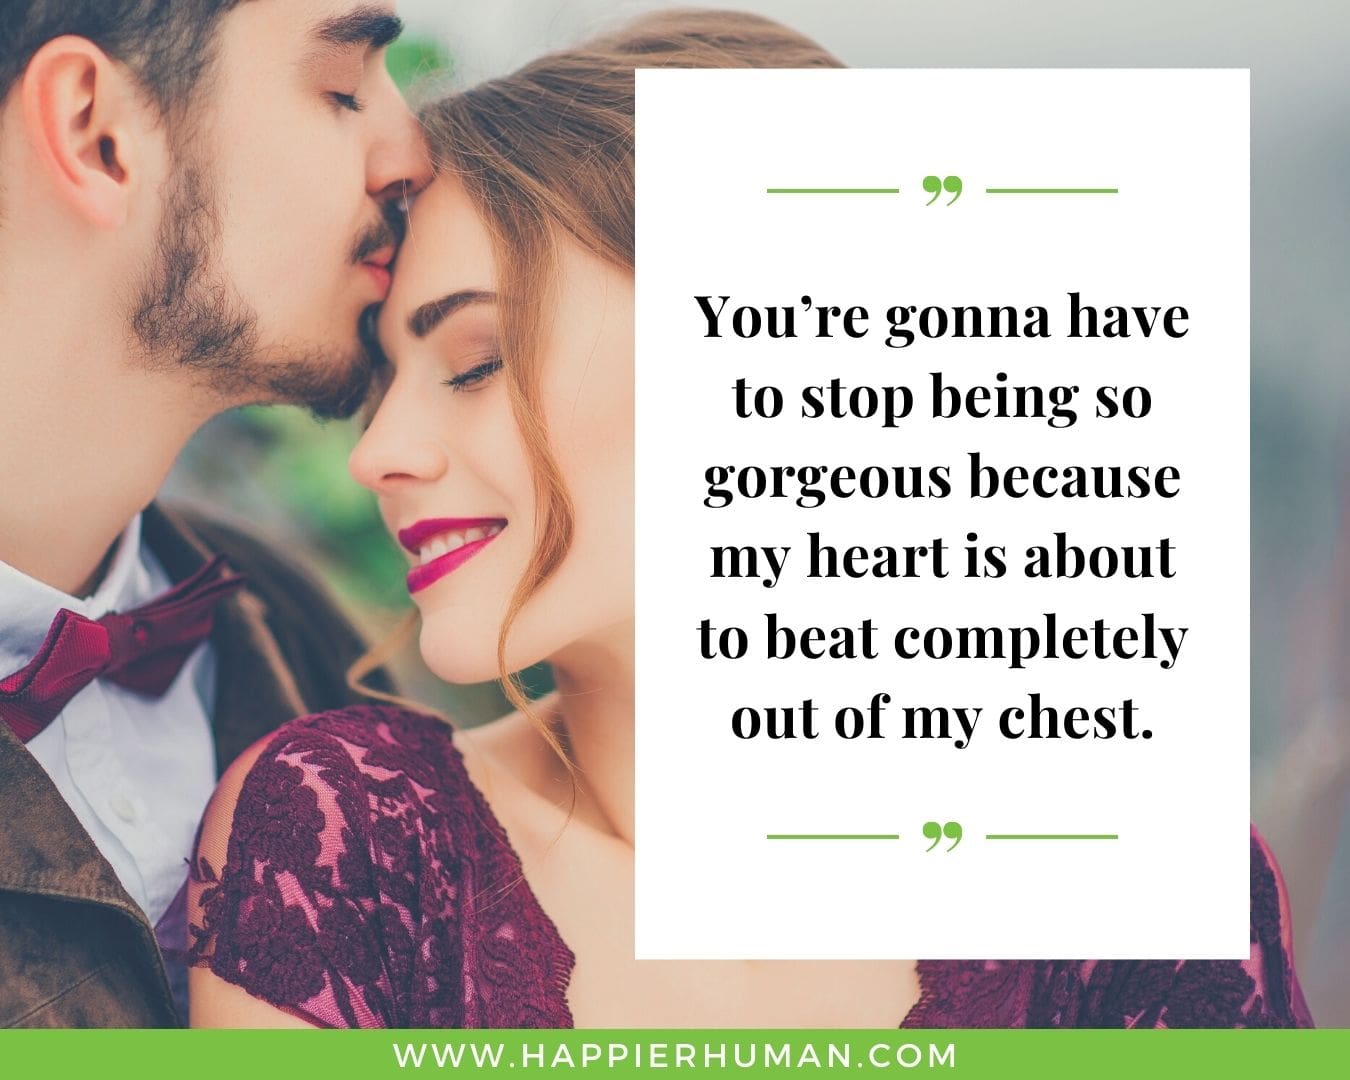 Funny Love Quotes for Her - “You’re gonna have to stop being so gorgeous because my heart is about to beat completely out of my chest.”